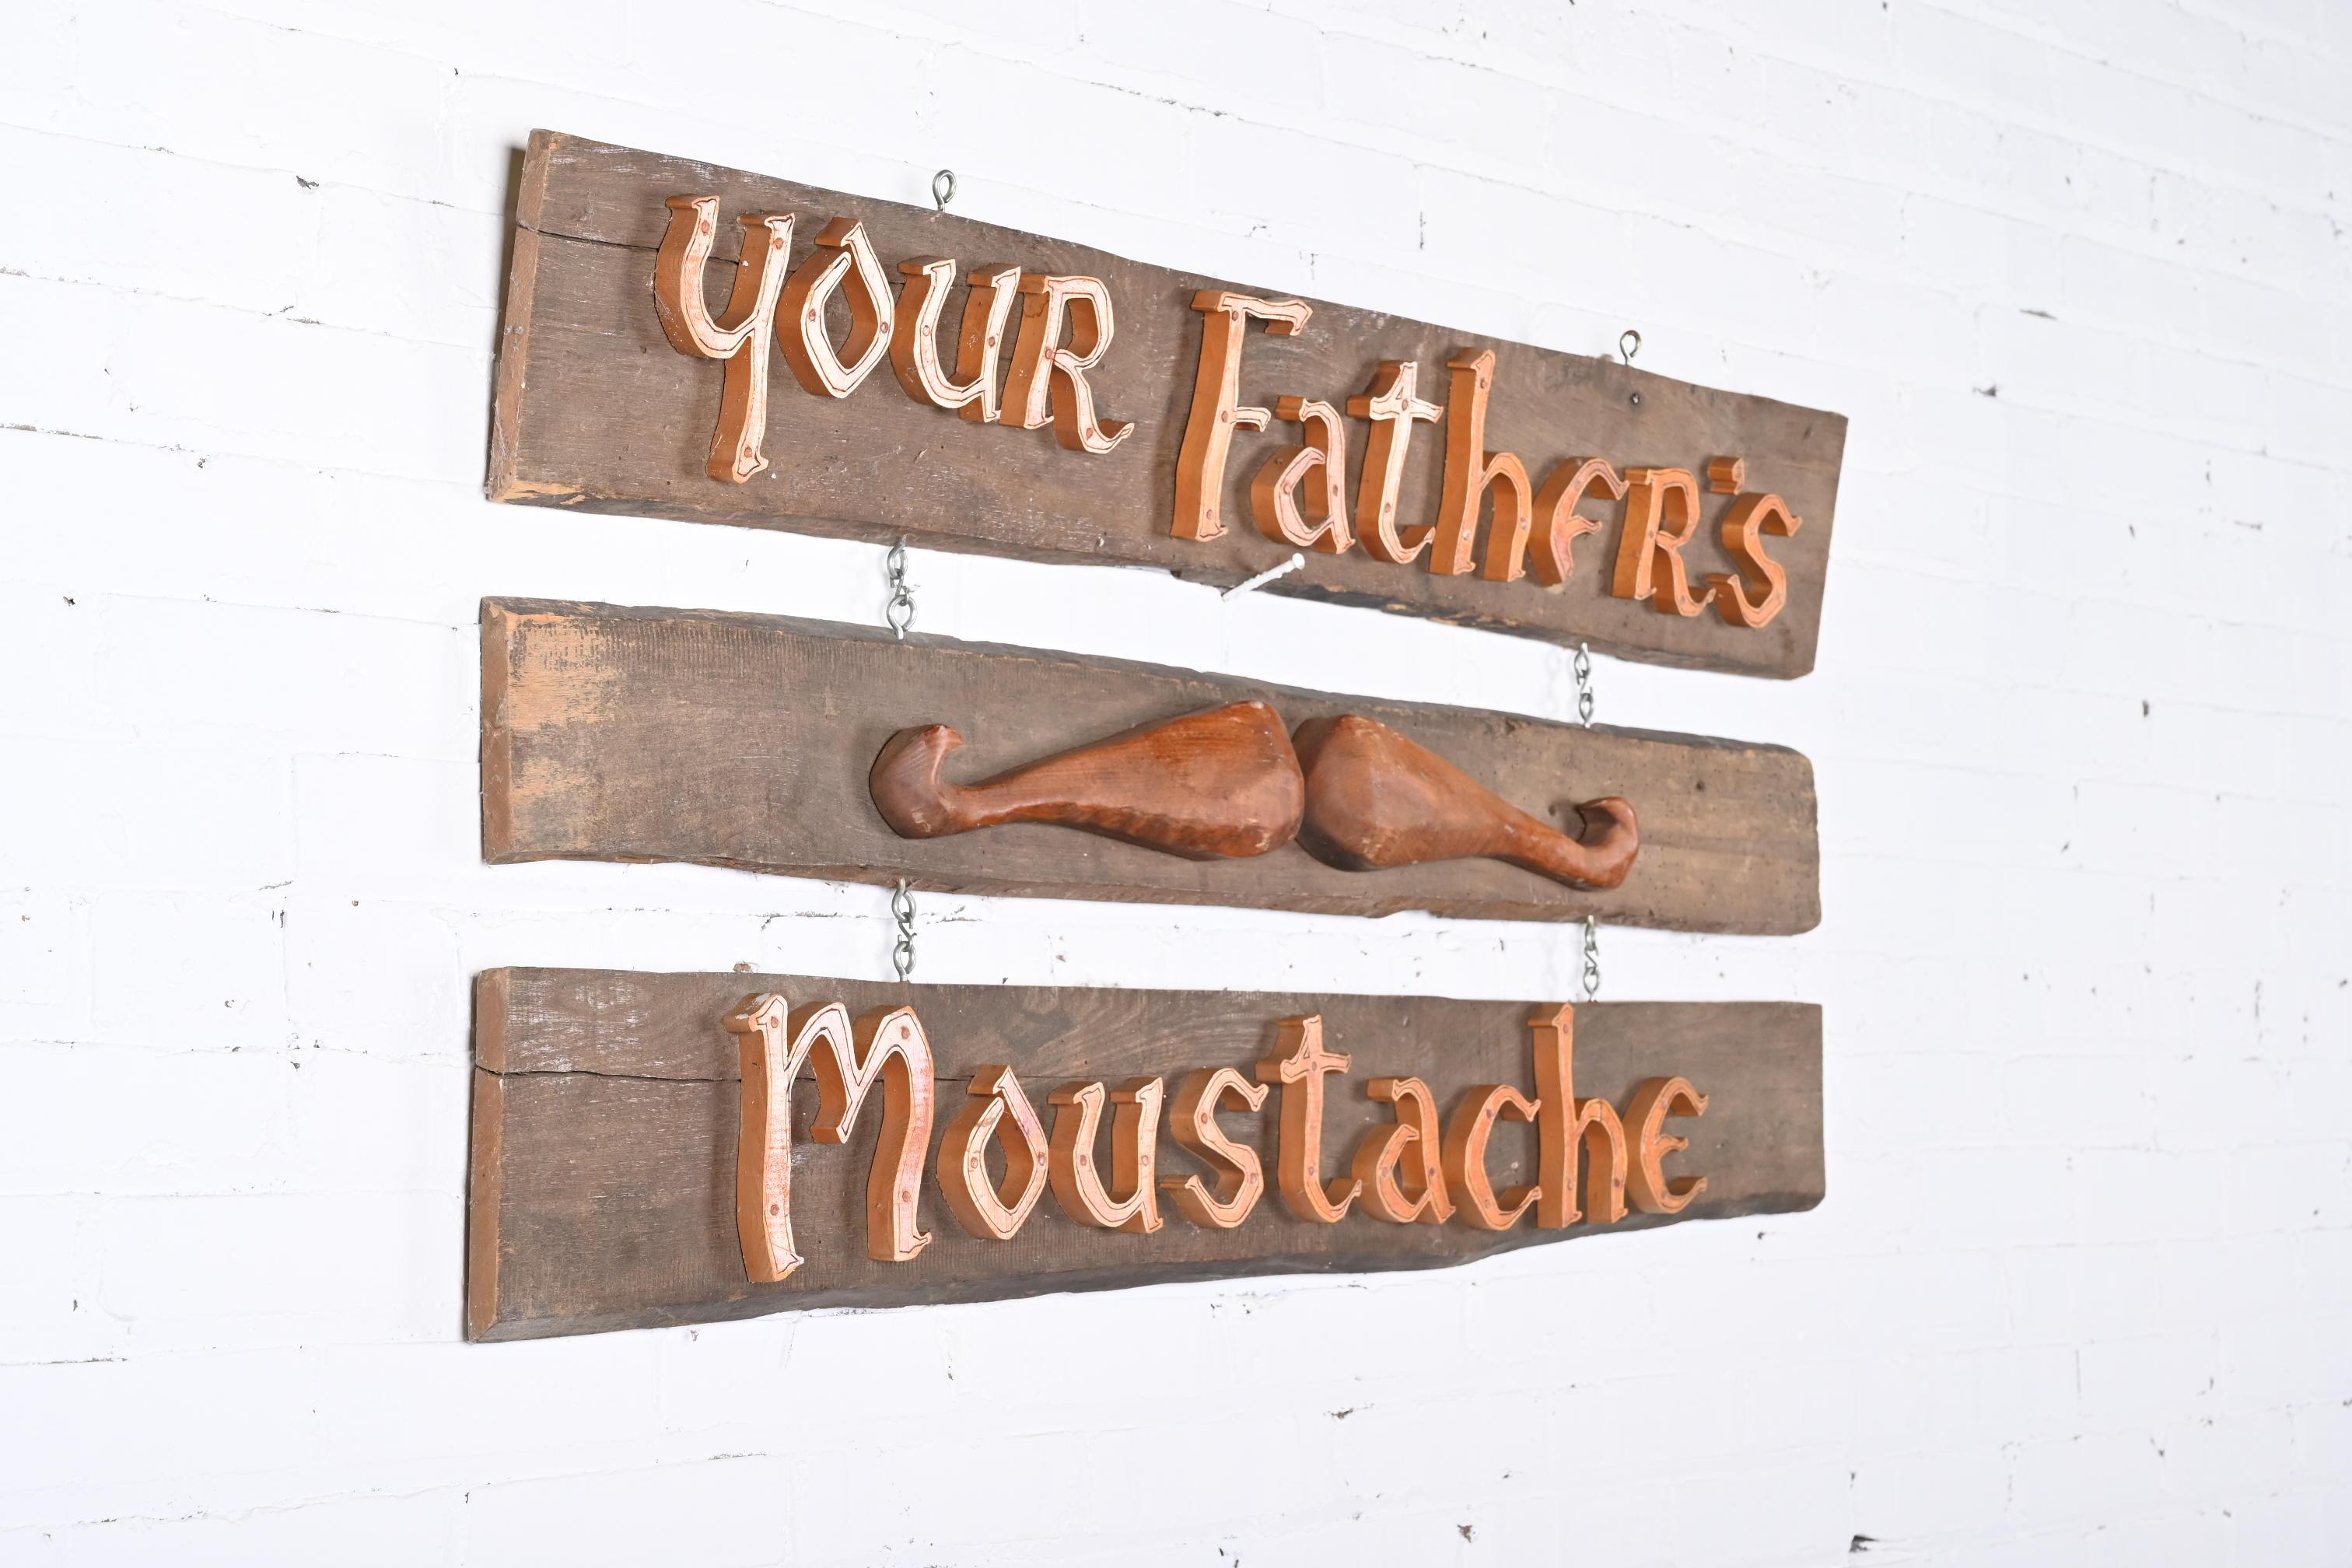 Holz- Pub-Schild „Your Father's Moustache“ im Zustand „Gut“ im Angebot in South Bend, IN